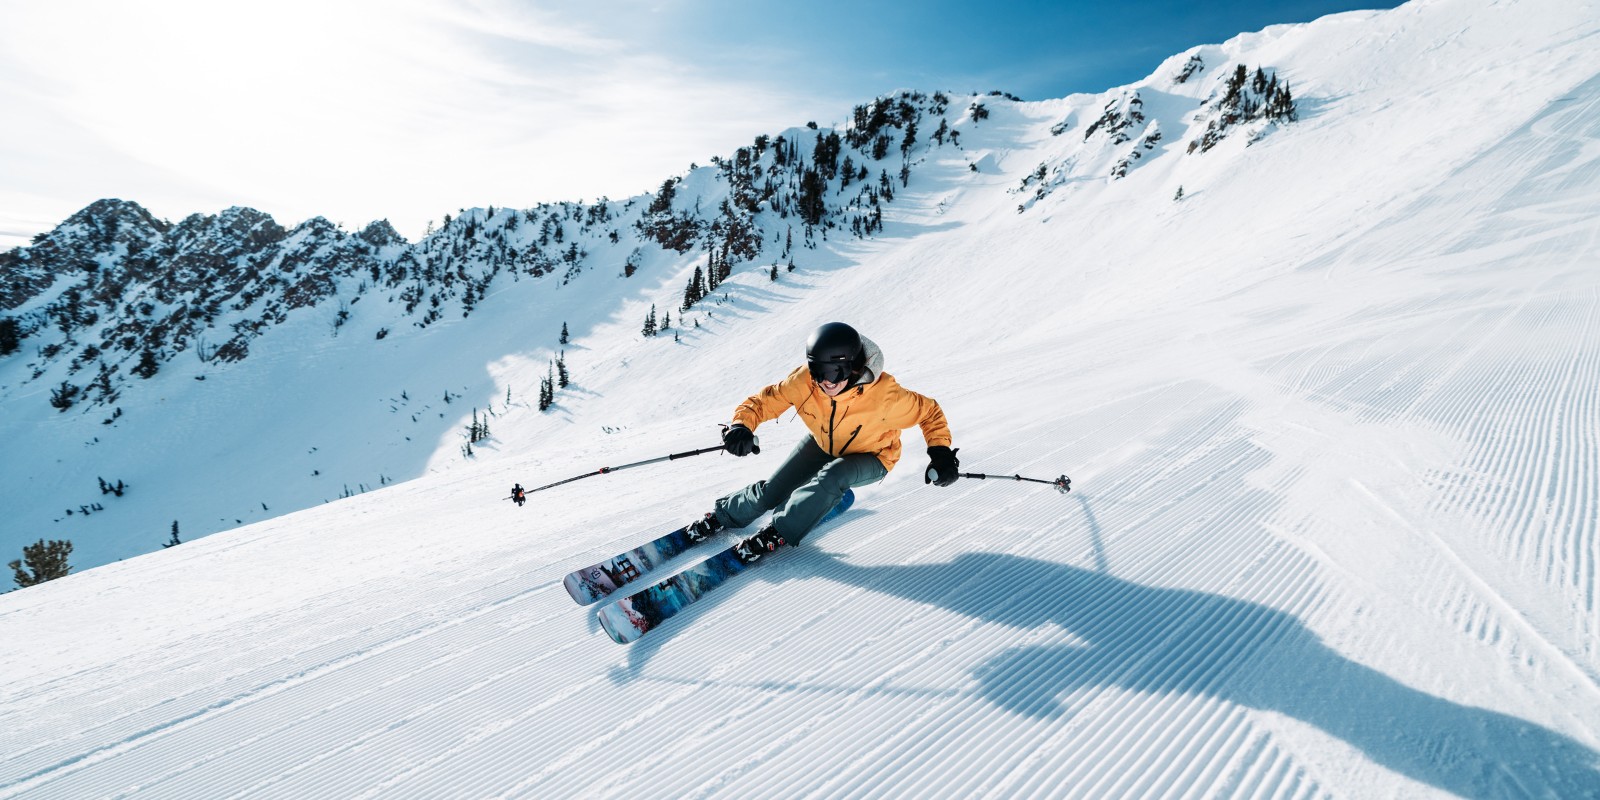 Discover Snowbasin: More to Access